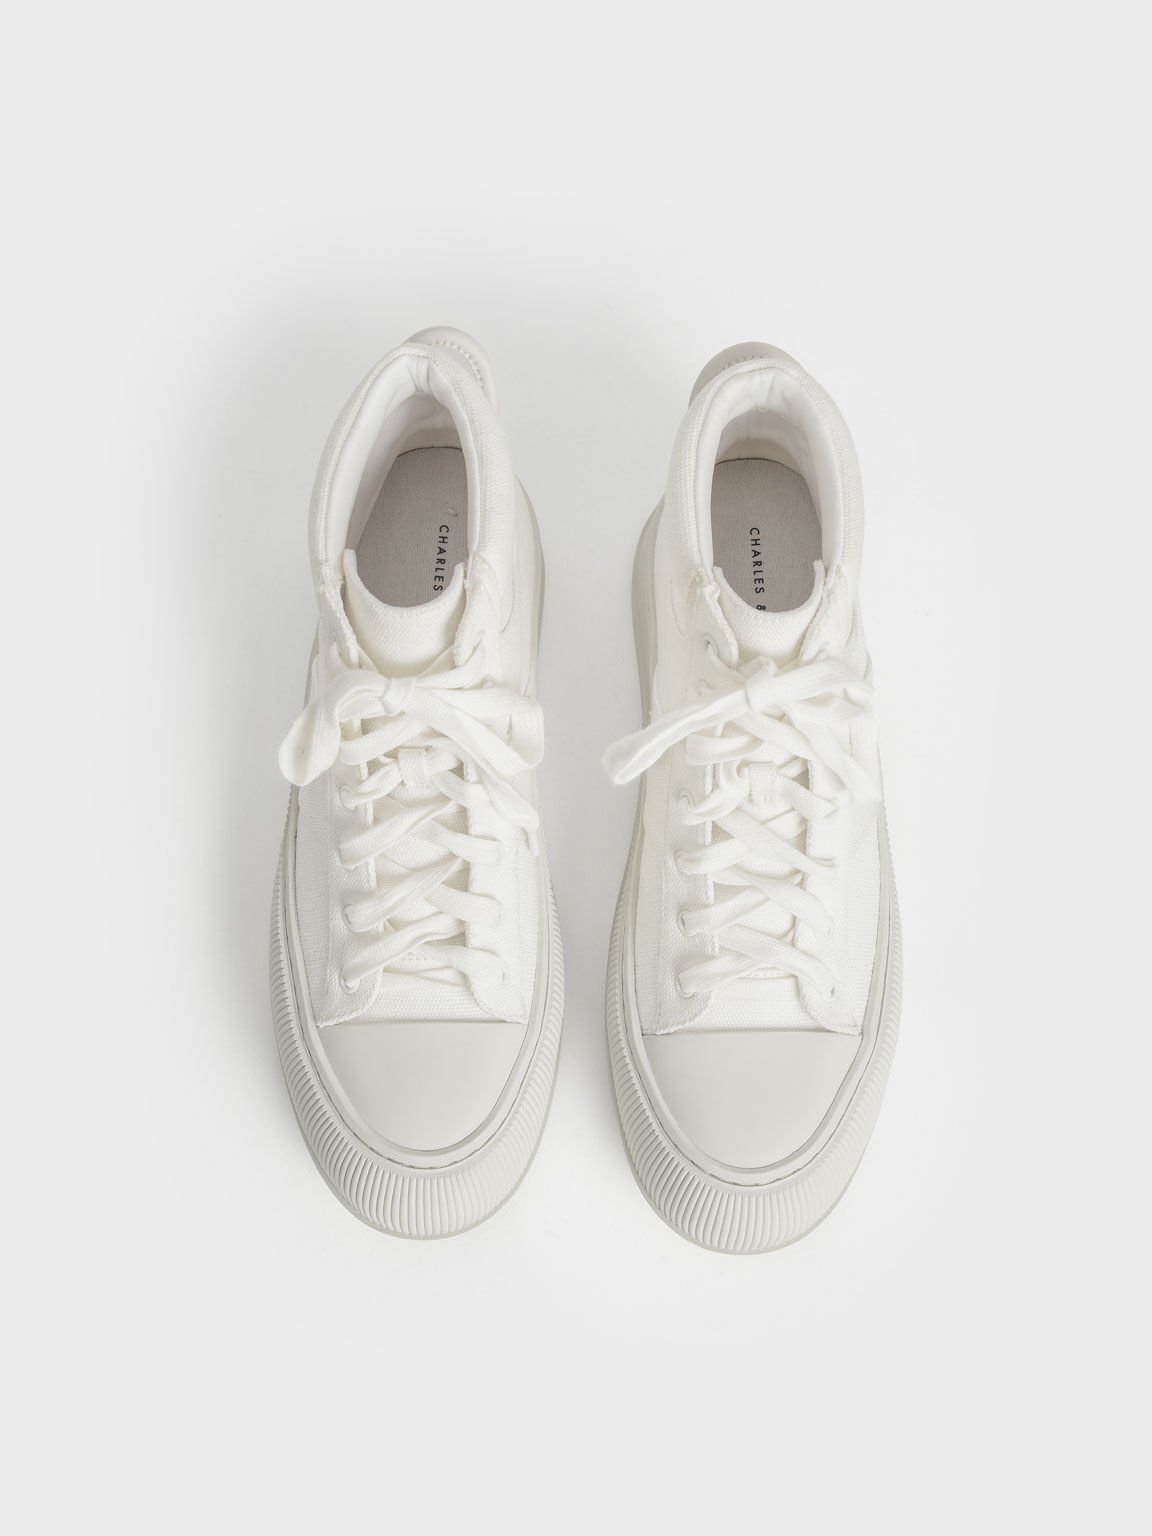 Canvas High-Top Sneakers, White, hi-res